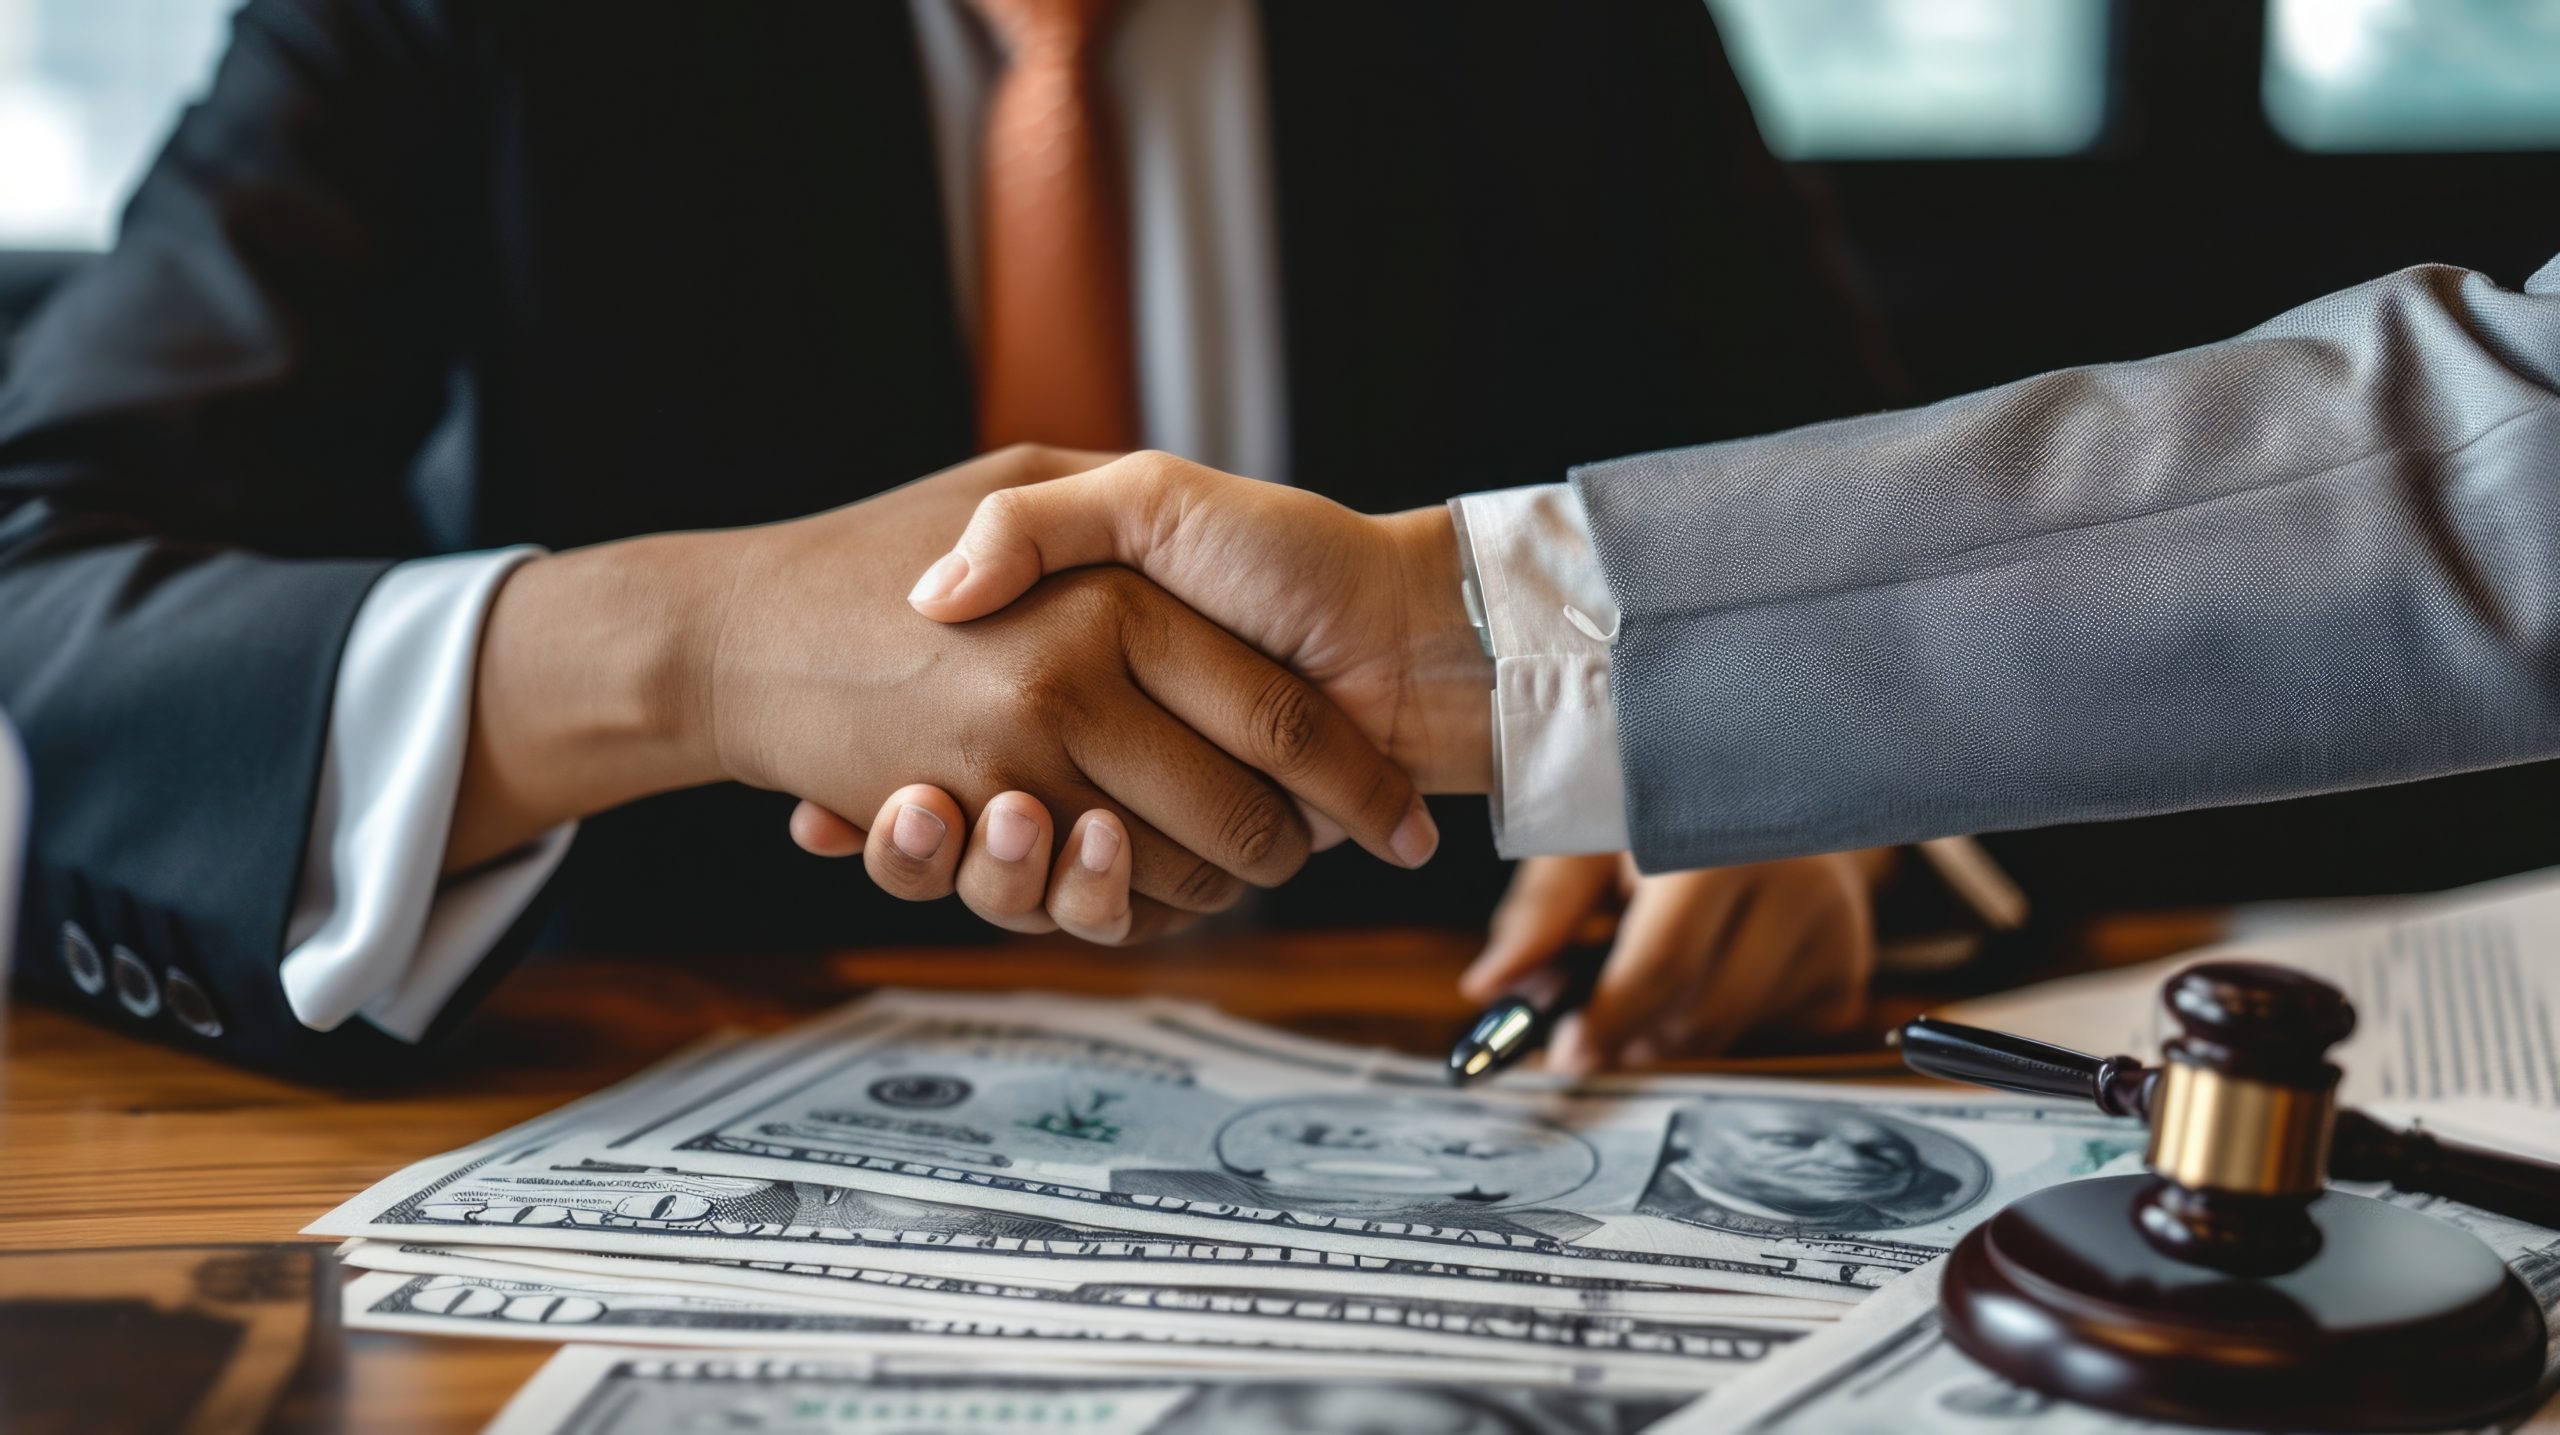 Two individuals shaking hands over a table covered with documents and money, symbolizing a financial agreement or legal settlement involving big insurance strategies and insights.